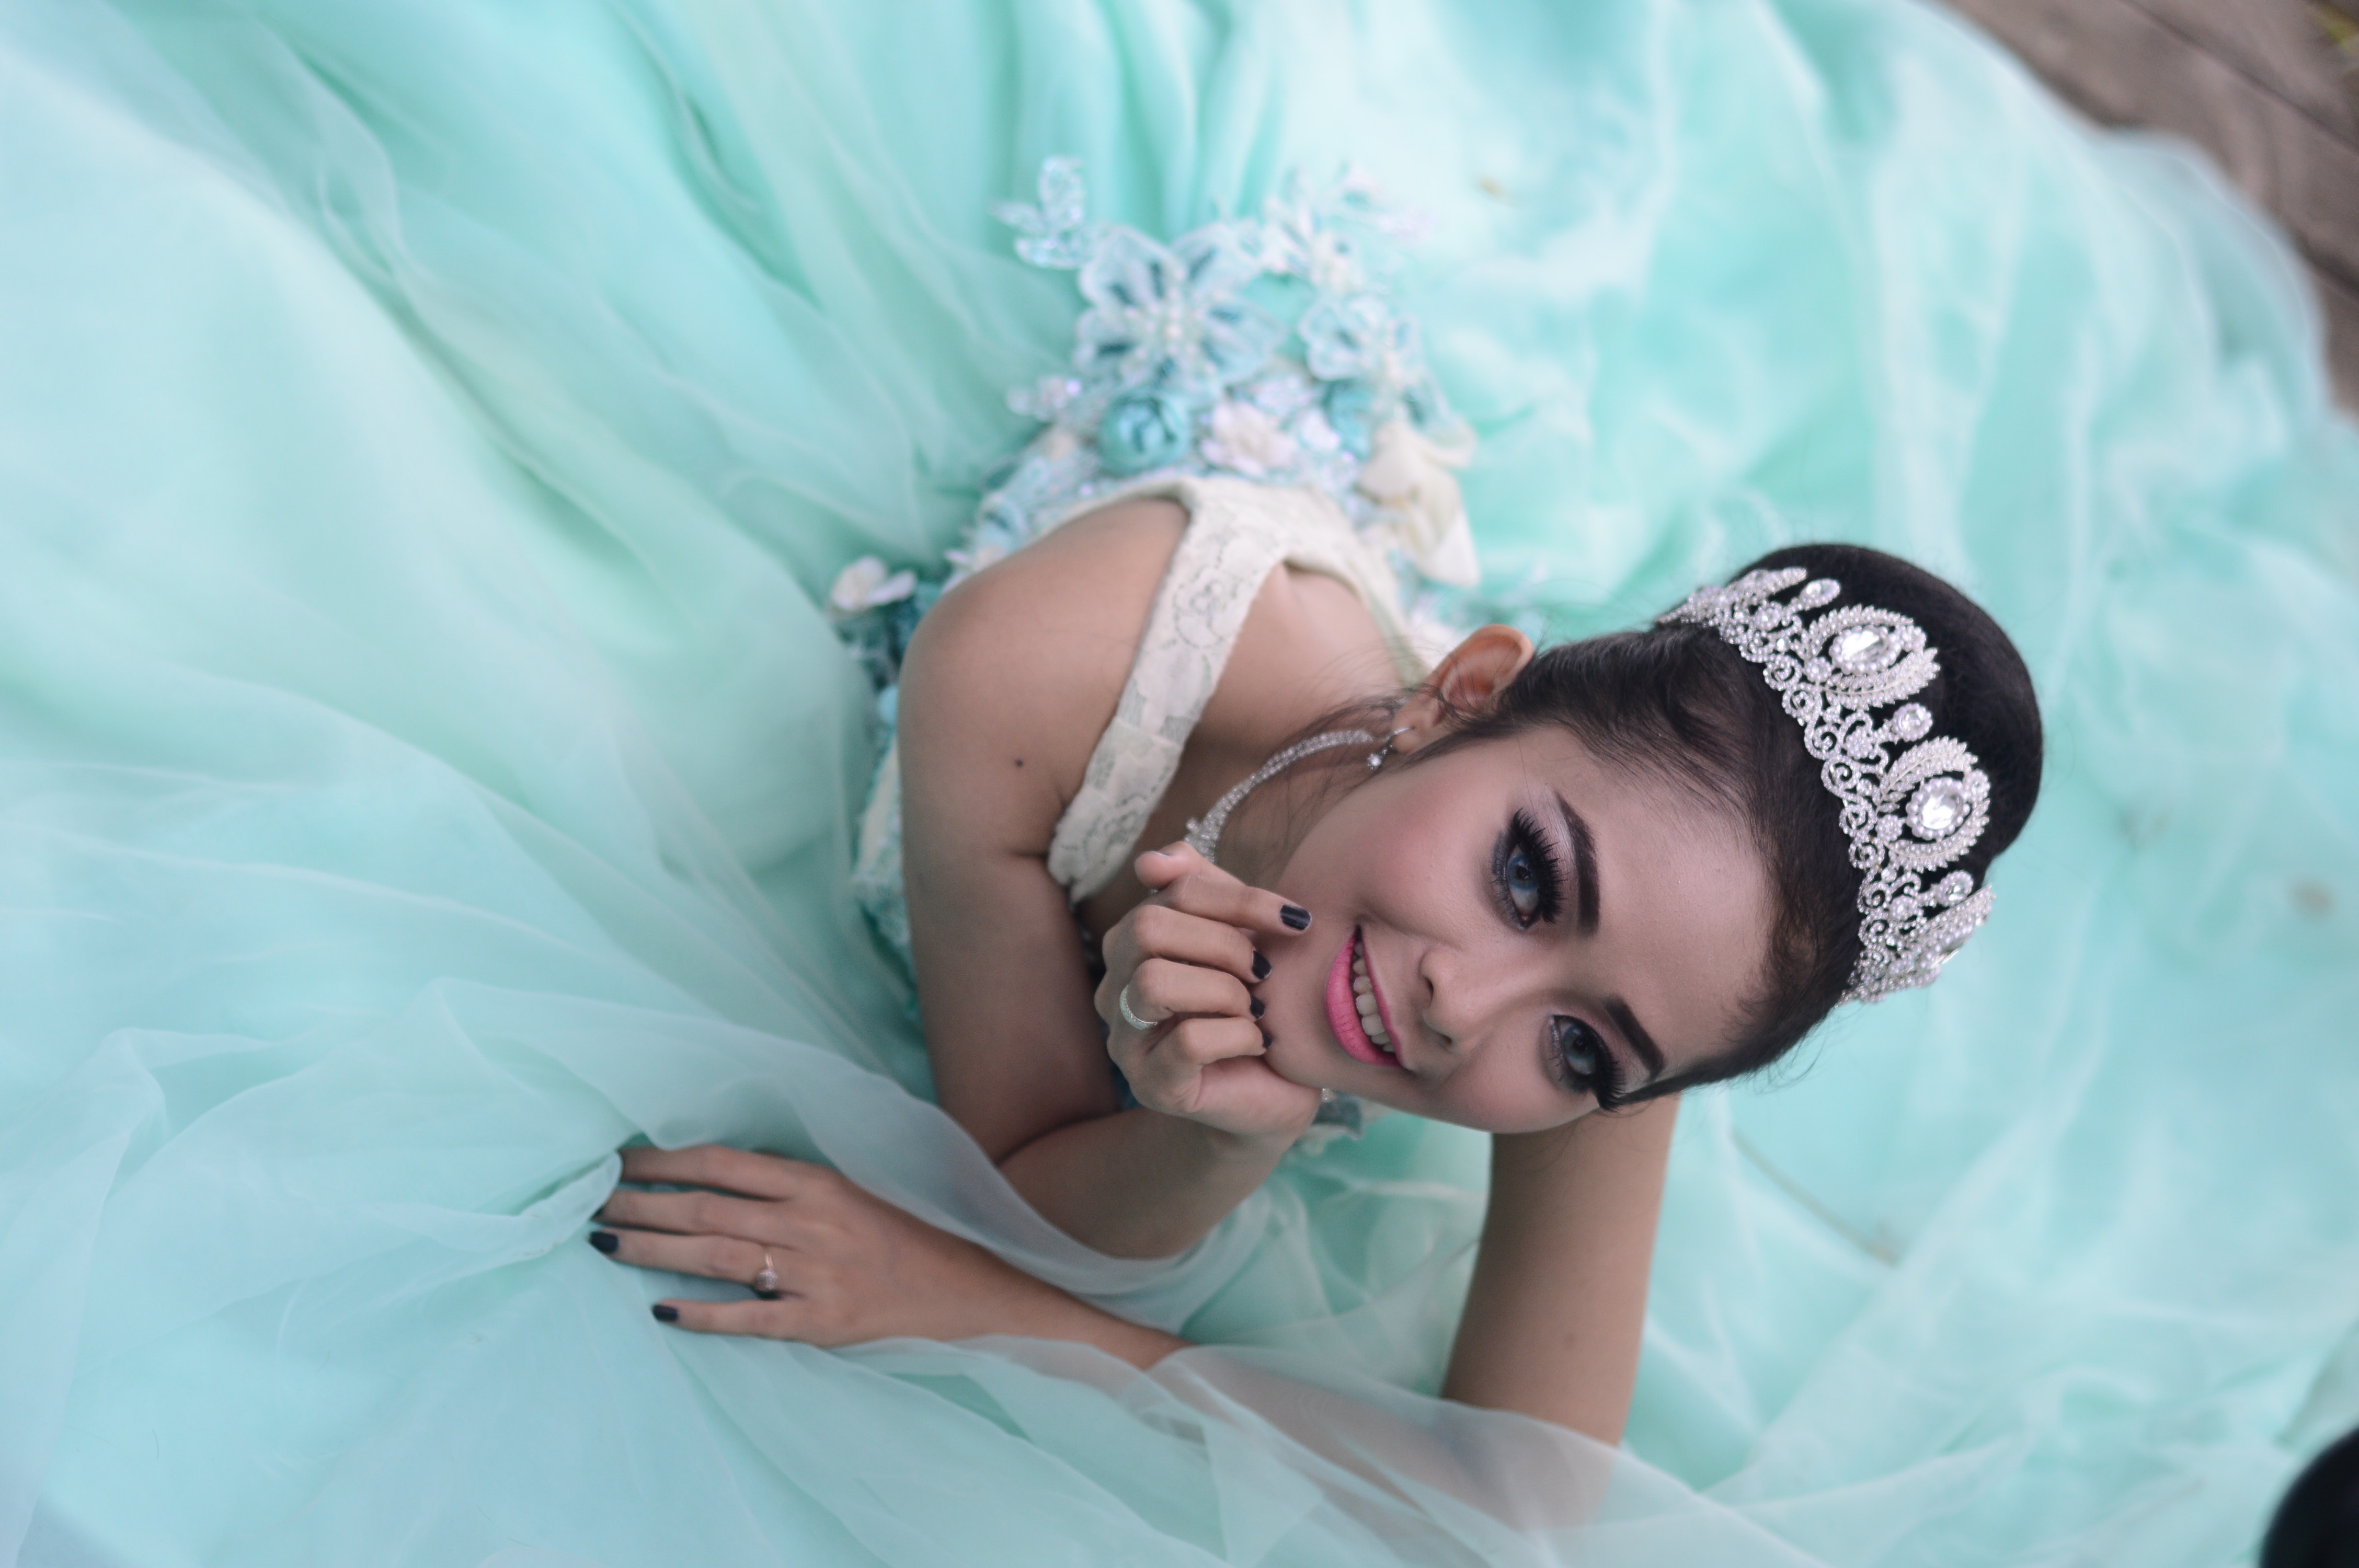 Woman wears teal chiffon gown and crown photo